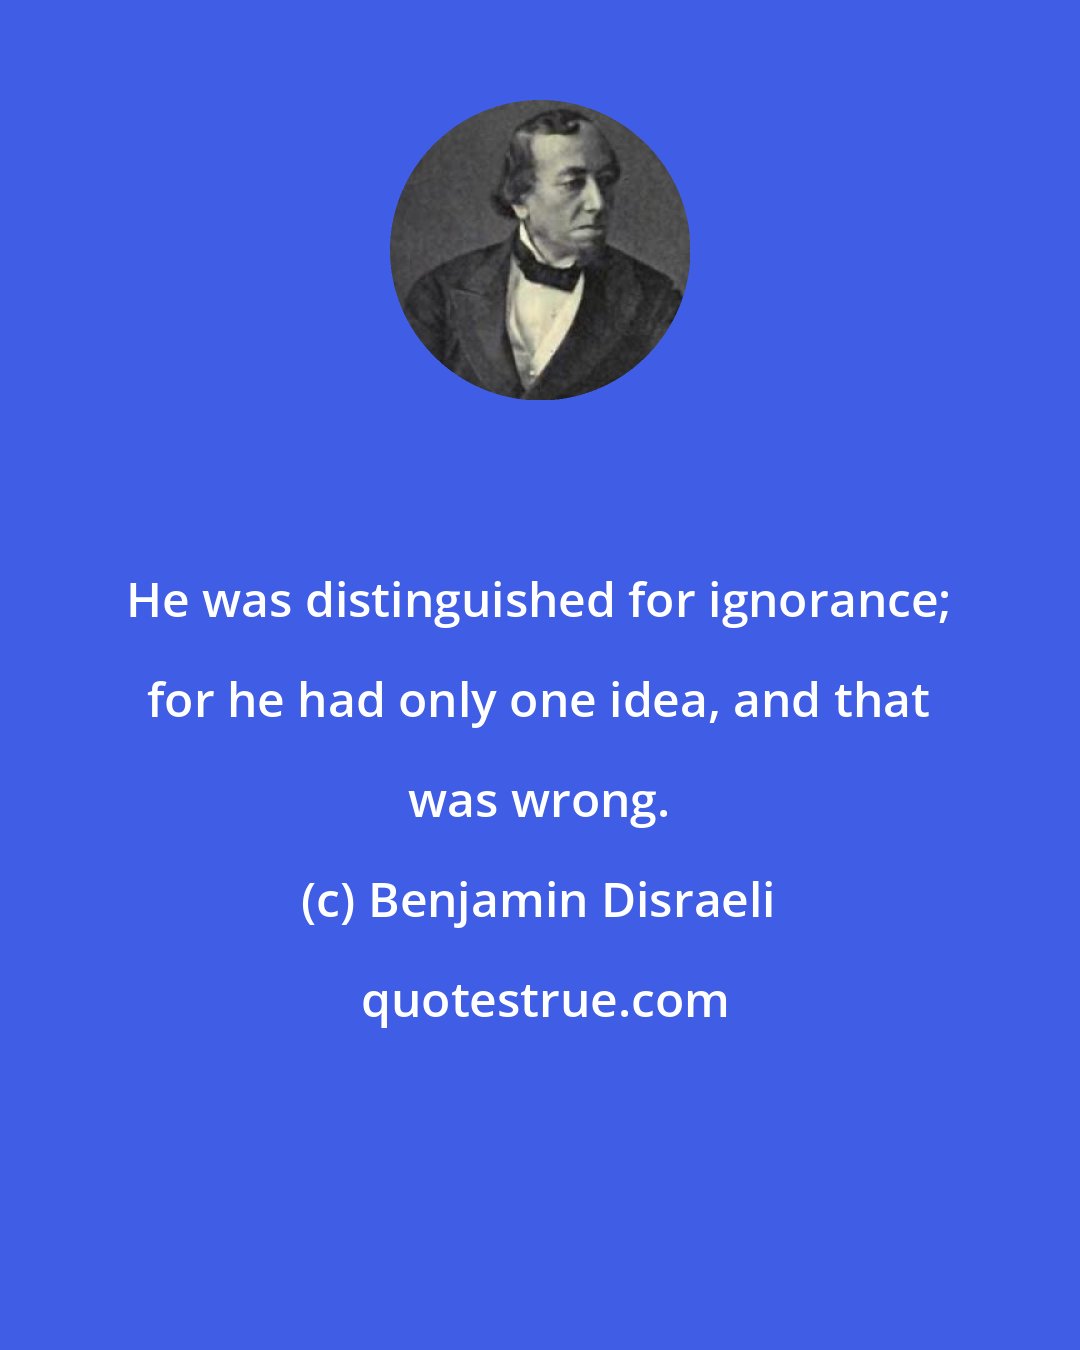 Benjamin Disraeli: He was distinguished for ignorance; for he had only one idea, and that was wrong.